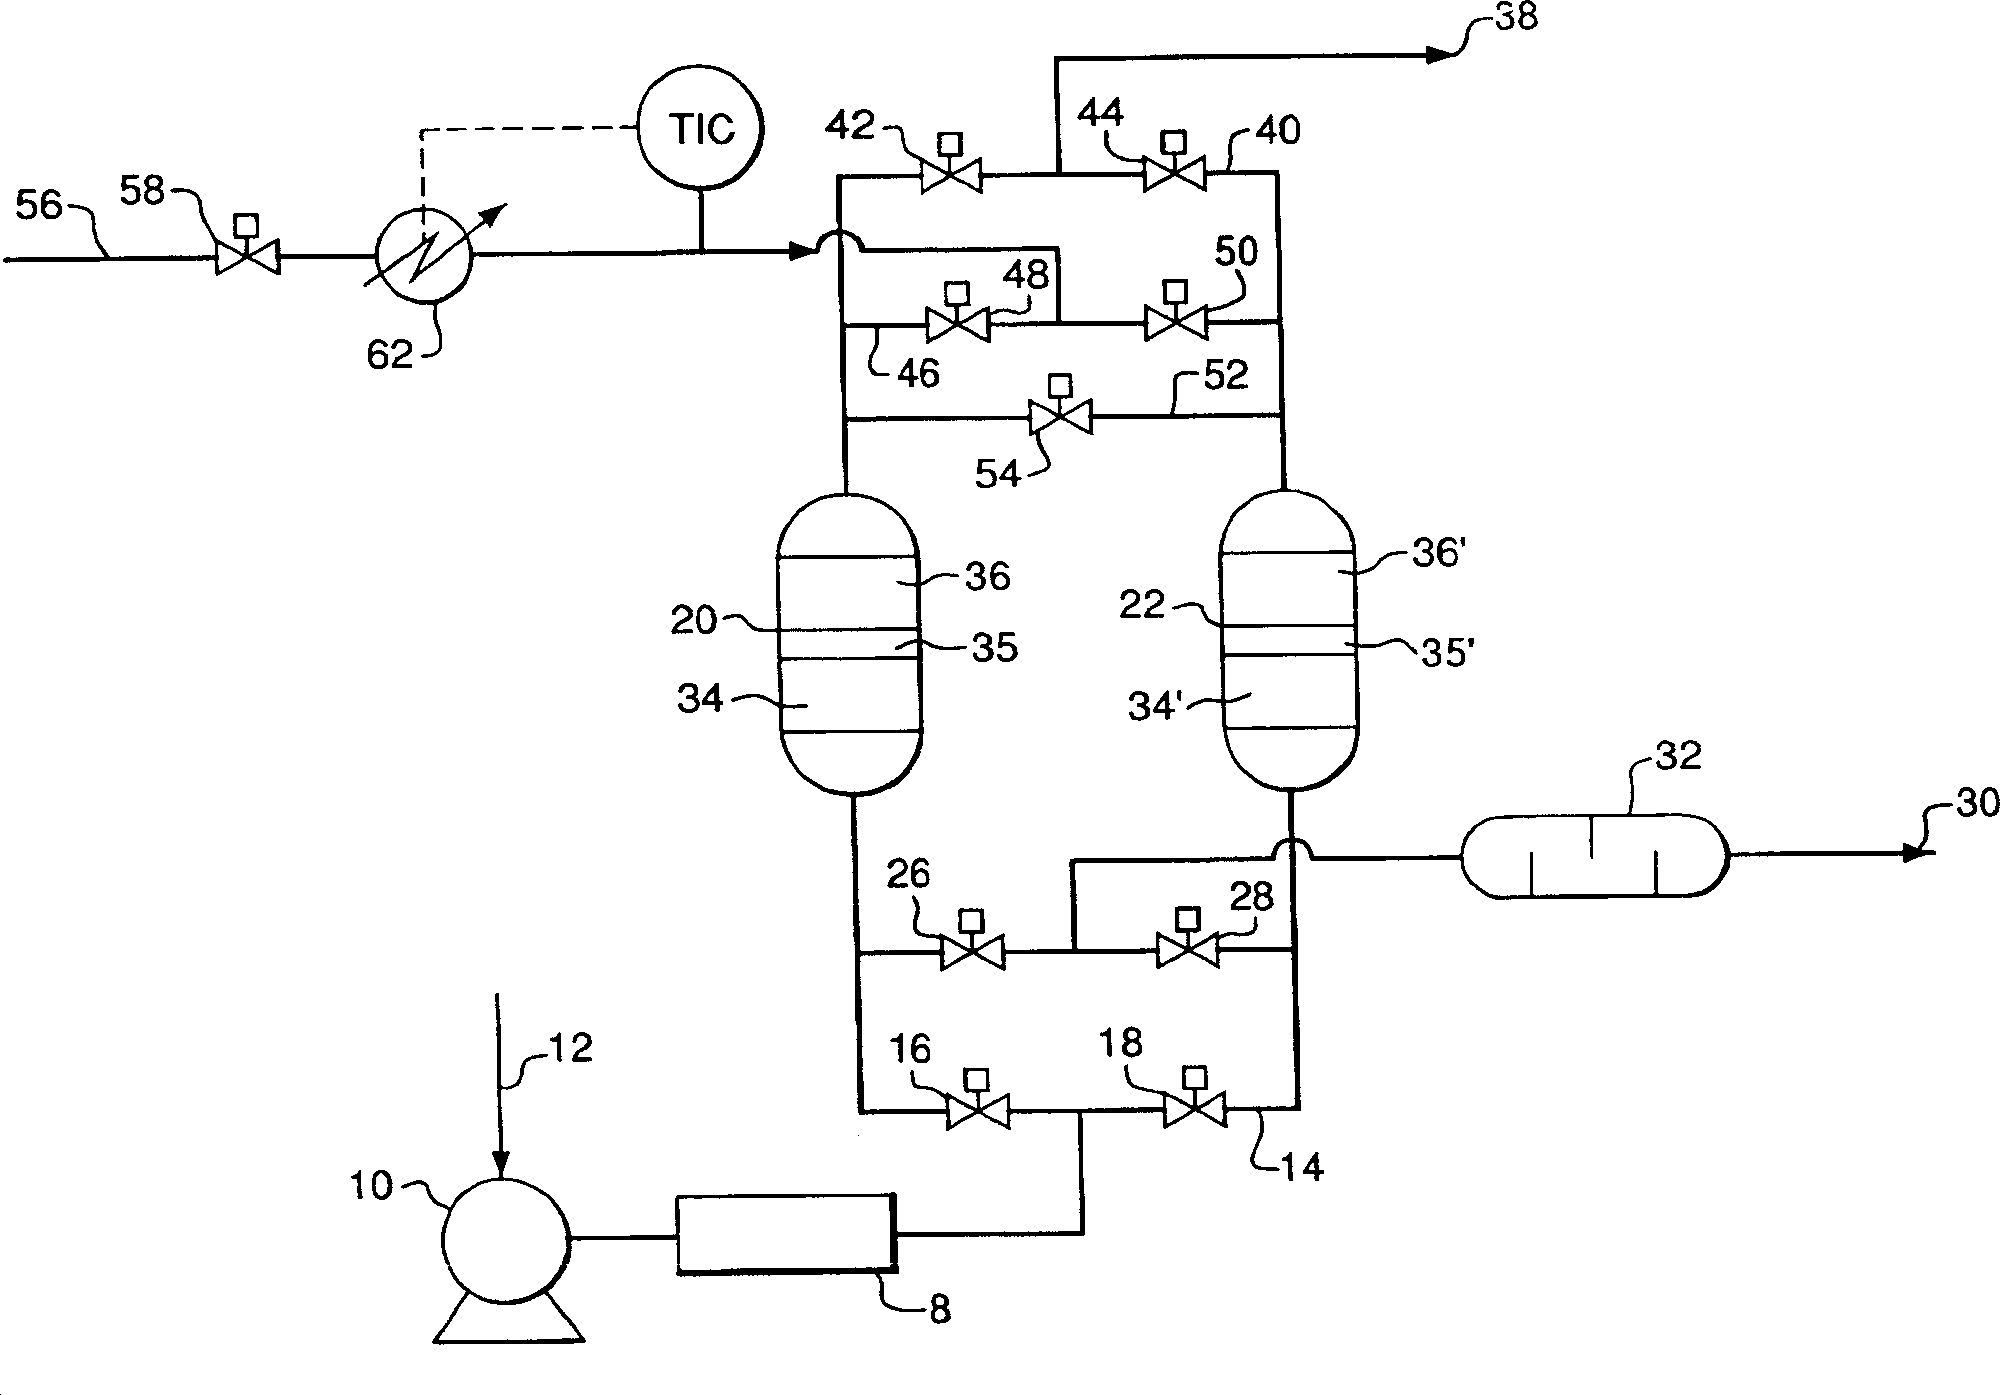 Process of absorbing detal gas from row material air flow